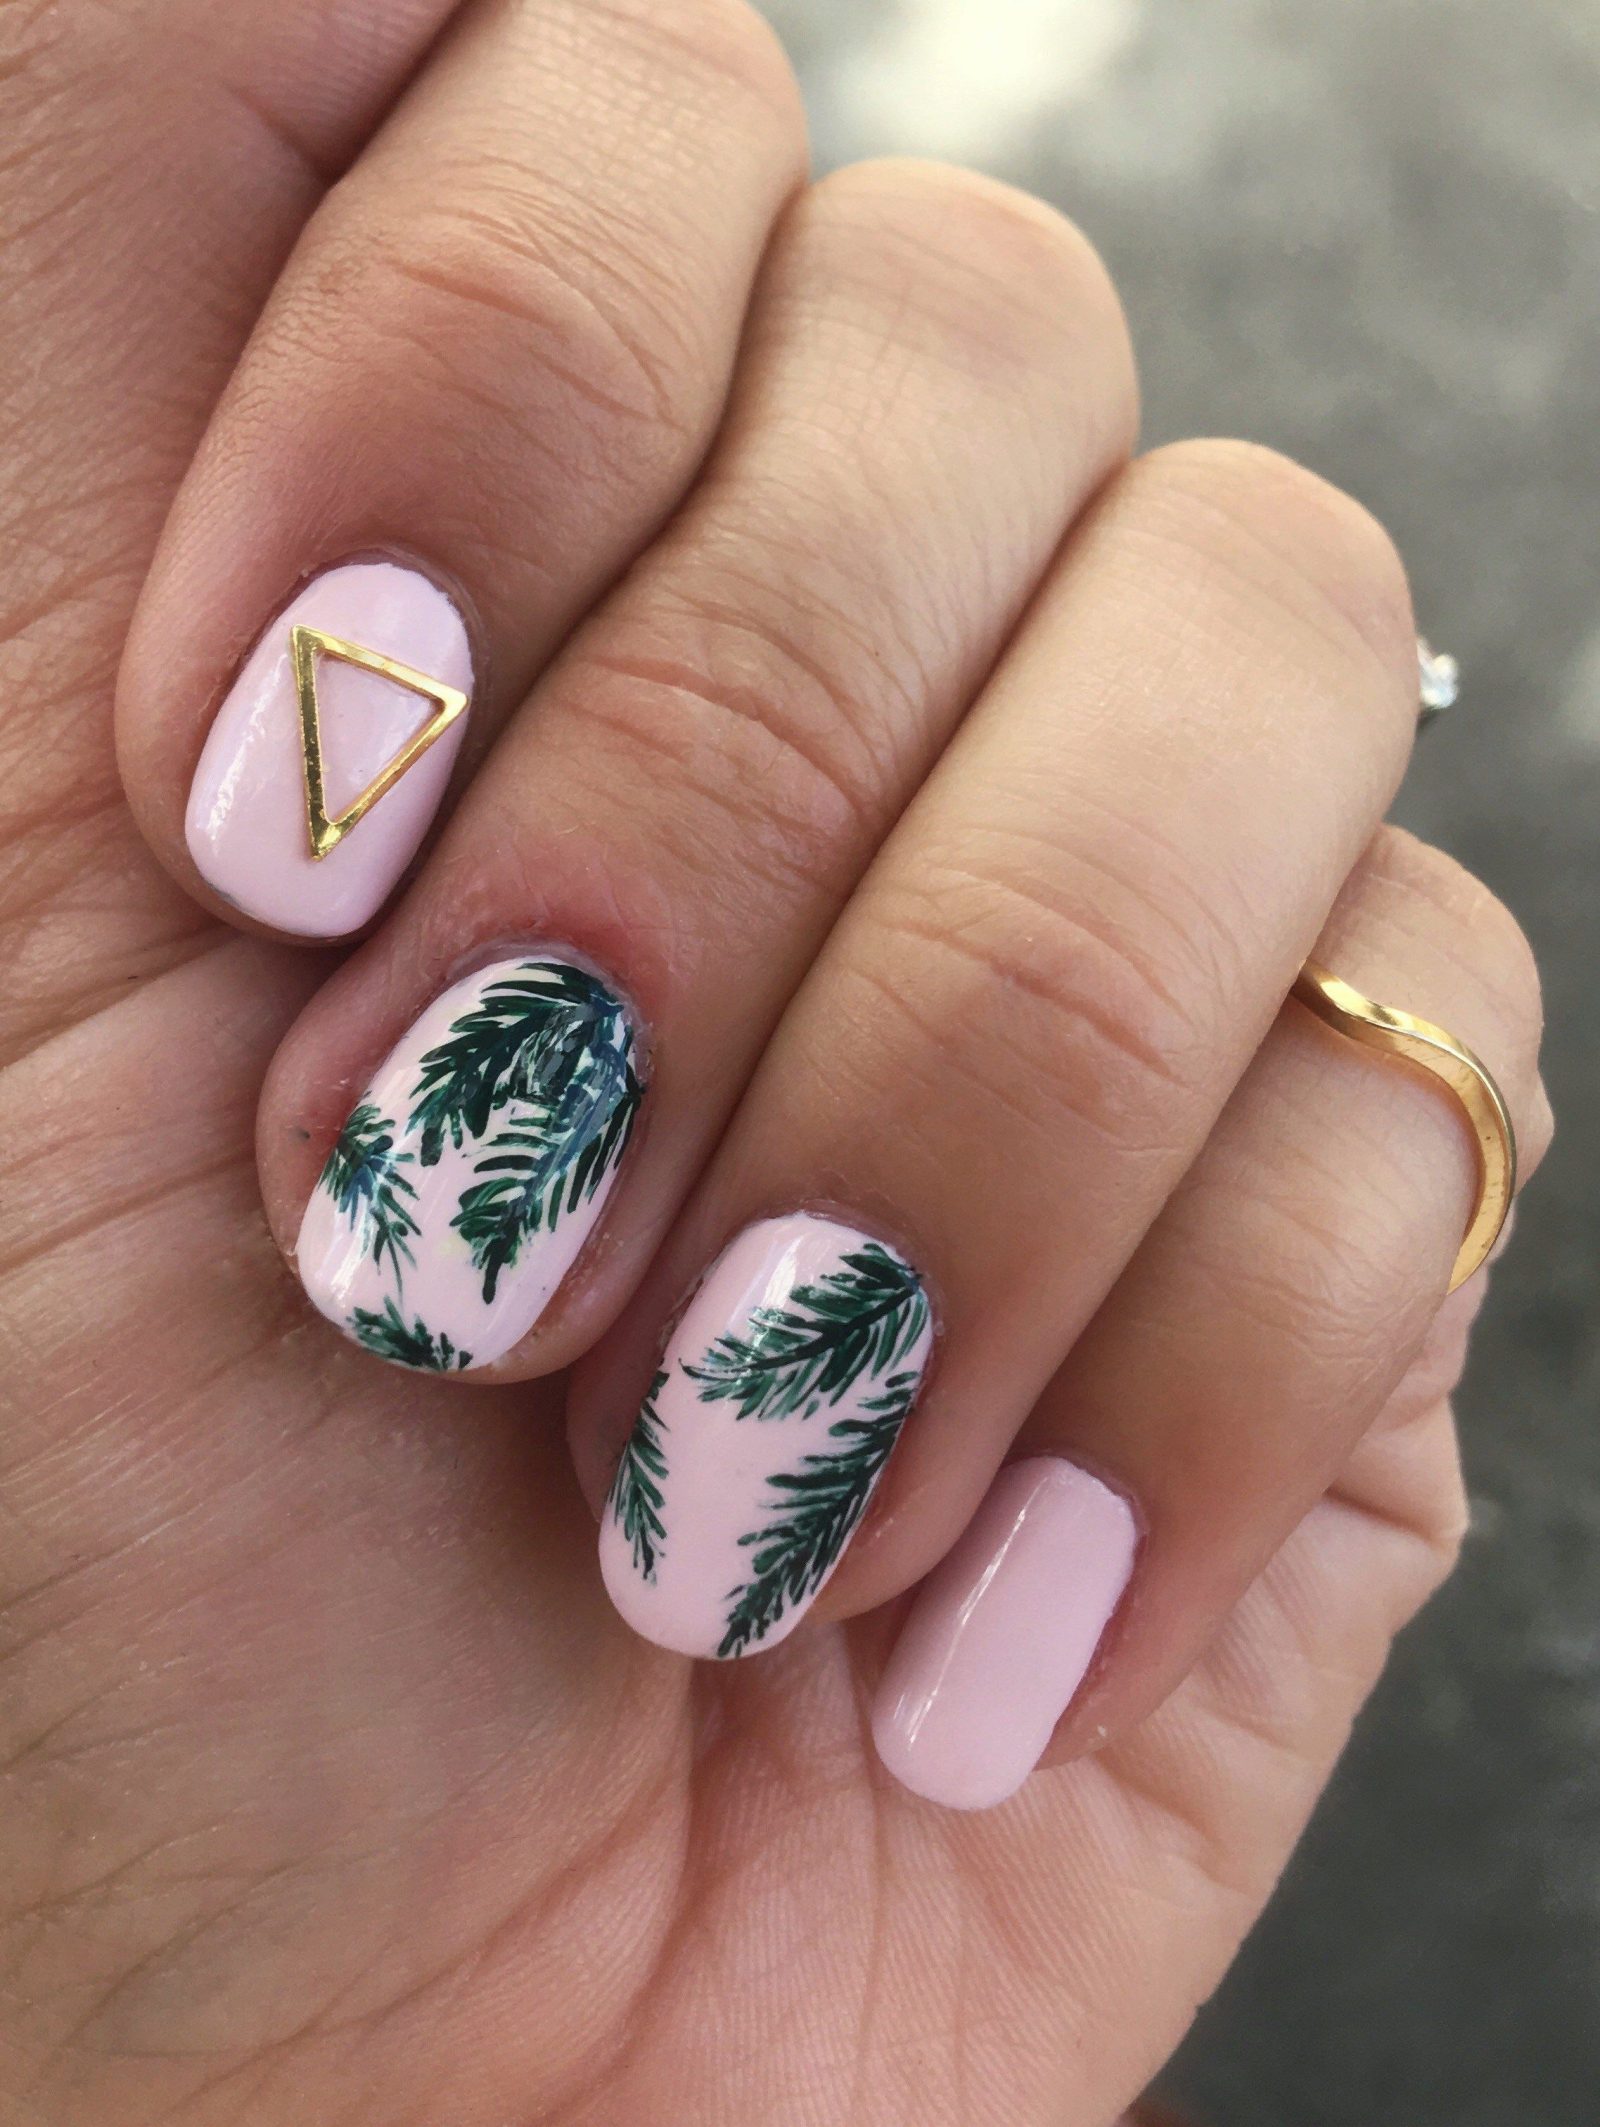 palm-nails-summer-manicure-trend